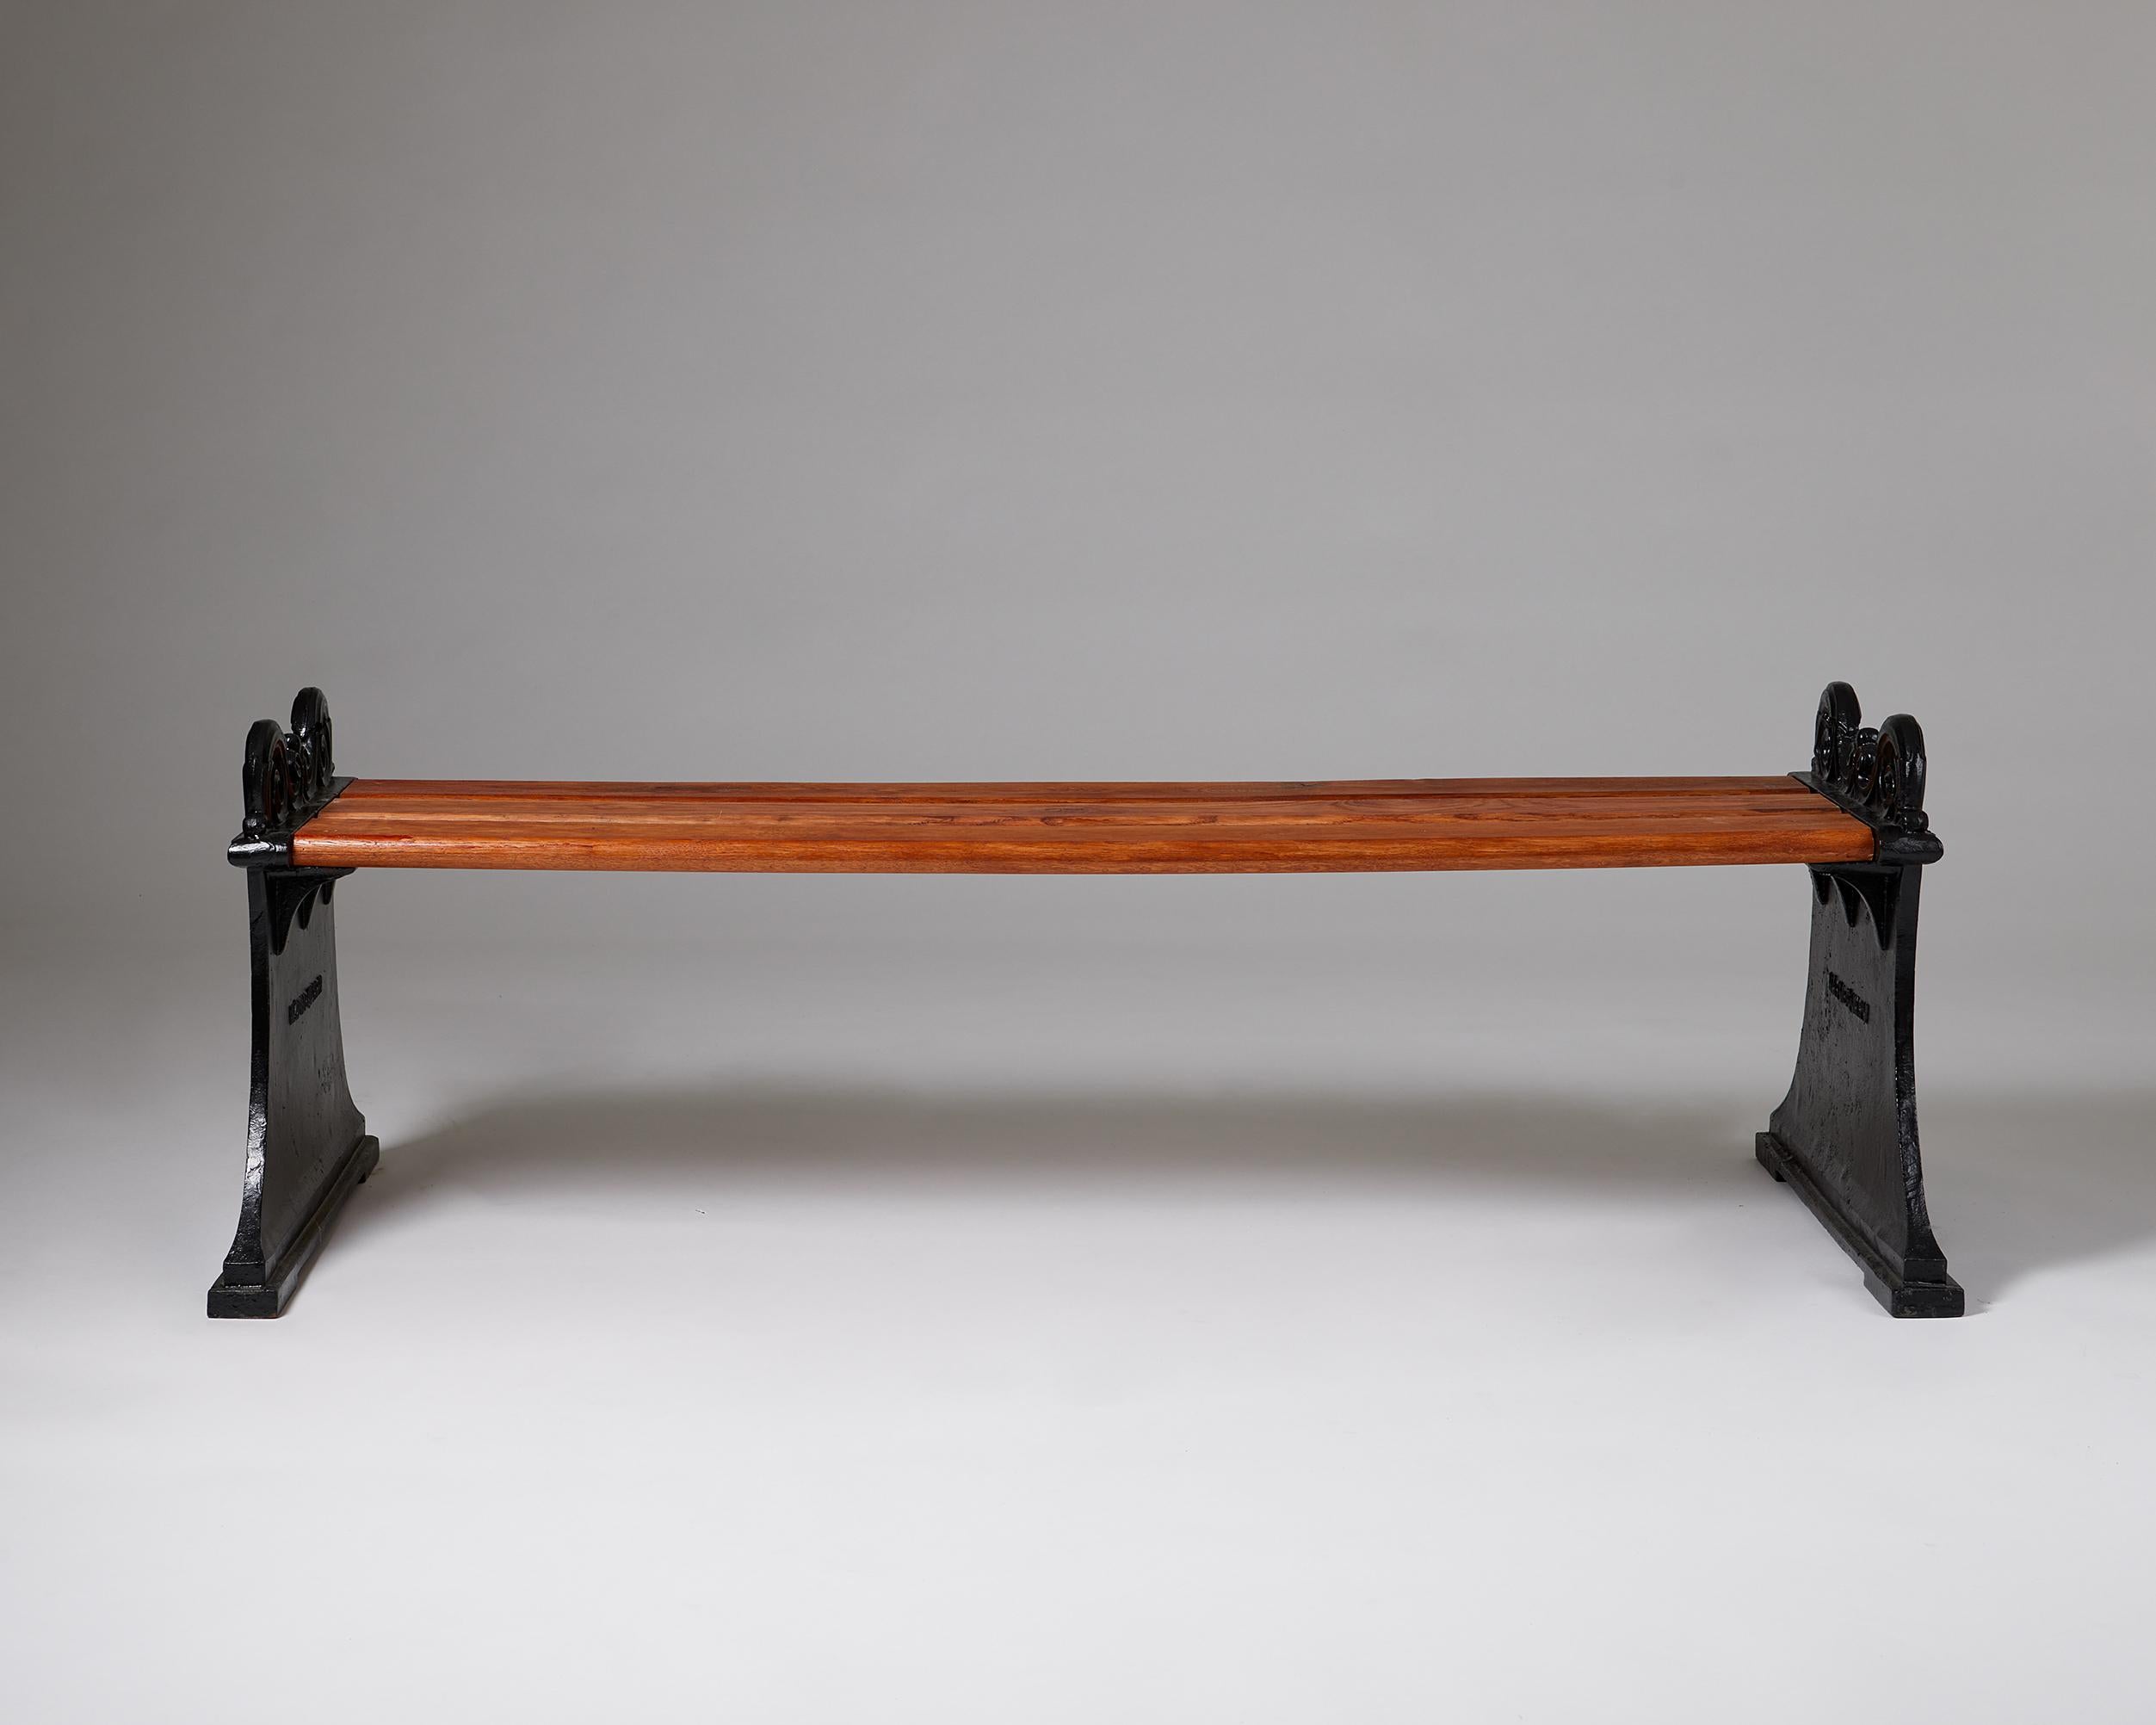 Mid-Century Modern Bench with a Pair of Gables ‘Parkbänk No 1’ designed by Folke Bensow, Sweden